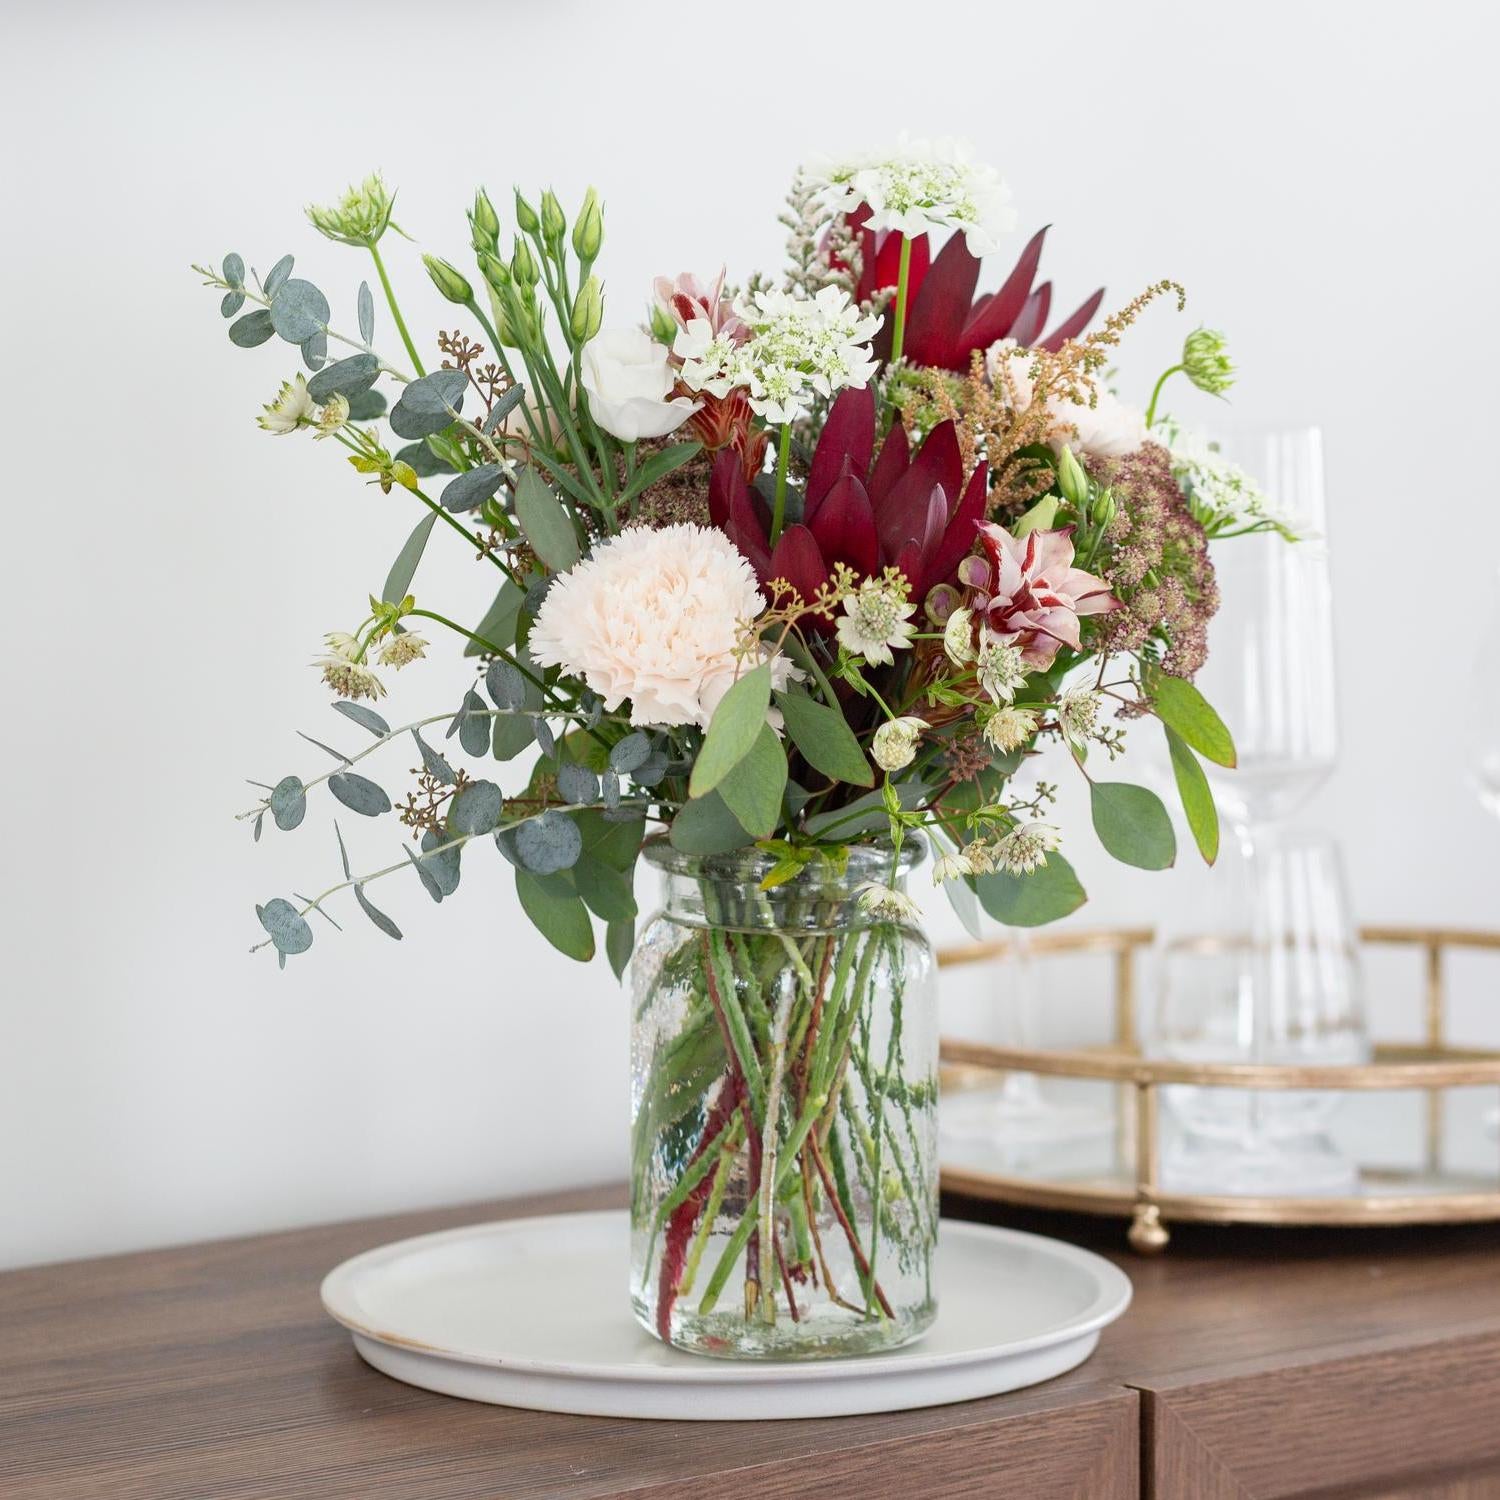 Luxurious bouquet with deep red magnolias, blush carnations, white roses, and lush greenery arranged in a textured glass jar vase, displayed on a wooden sideboard next to white ceramic plates and a reflective gold-rimmed serving tray with glassware in the background.